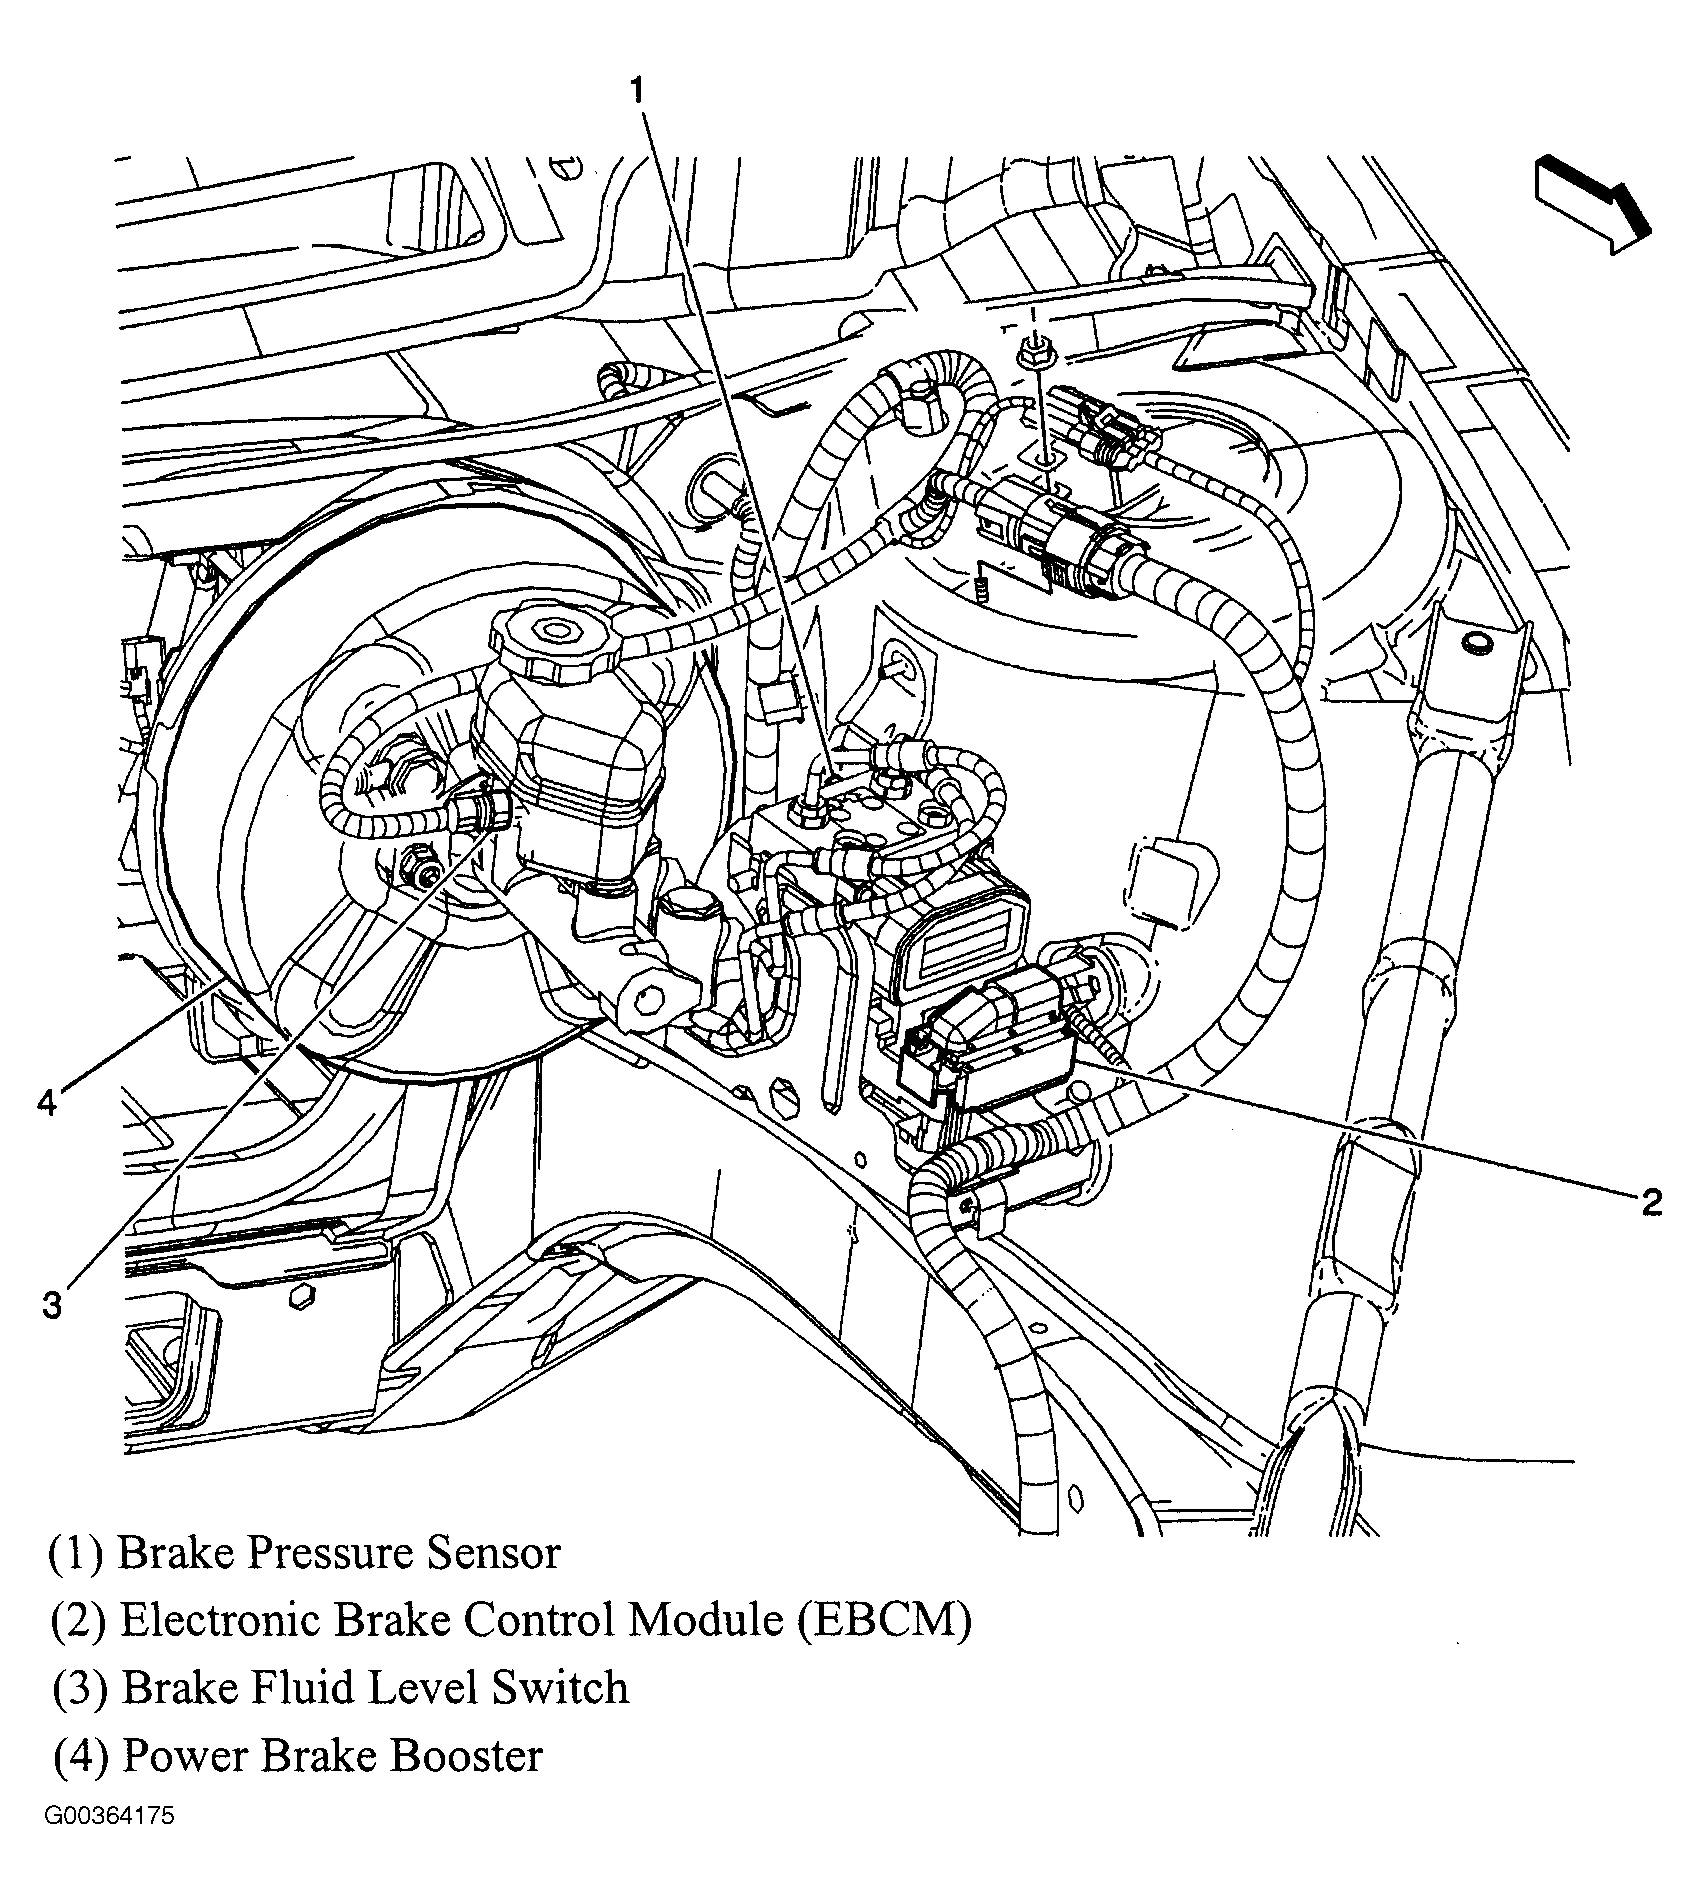 Buick LaCrosse CXS 2006 - Component Locations -  Left Rear Of Engine Compartment